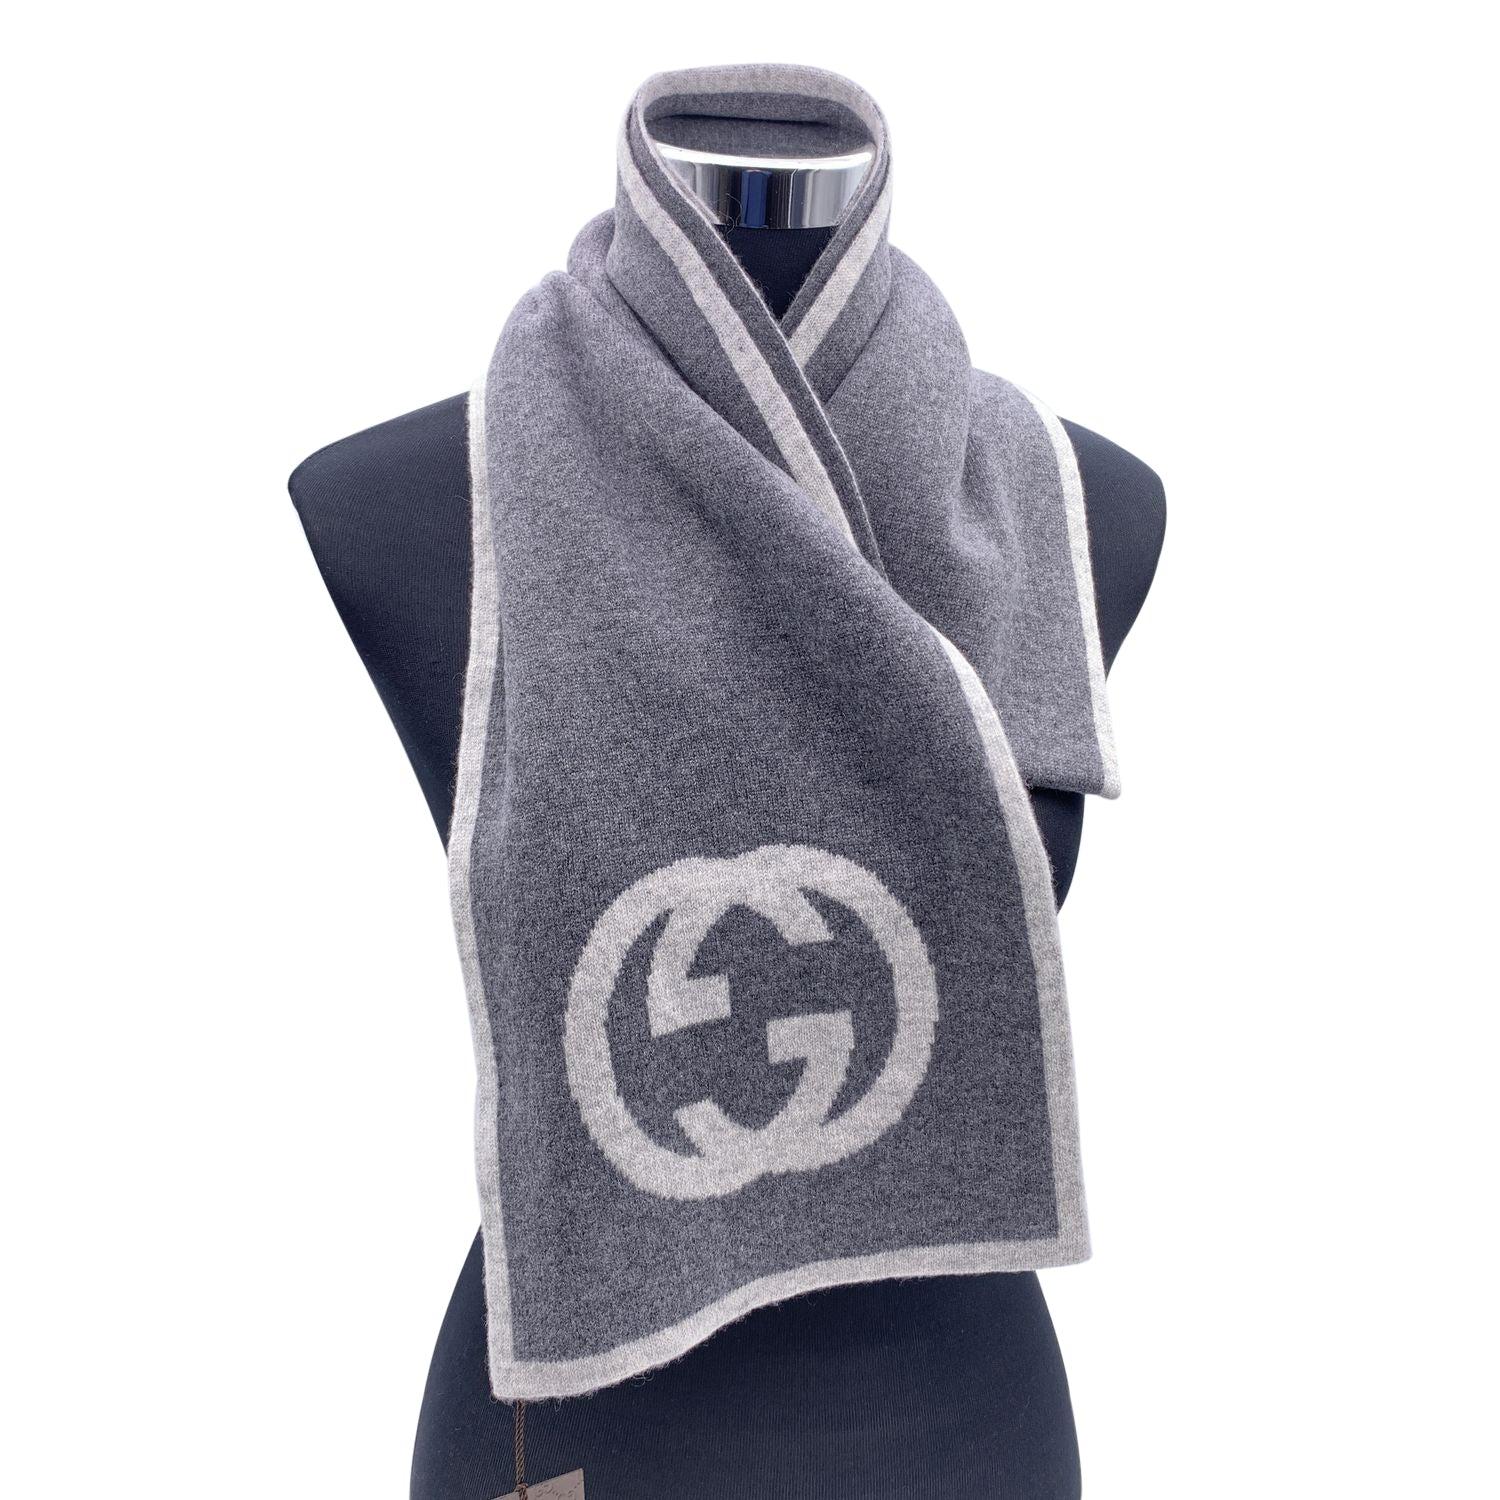 Light Grey and grey GG logo scarf by Gucci. Composition: 100% Cashmere. Width: 23 cm. Lenght: 180 cm. Made in Italy. Details MATERIAL: Cashmere COLOR: Grey MODEL: n.a. GENDER: Unisex Adults COUNTRY OF MANUFACTURE: Italy FEATURES: Multifunctional